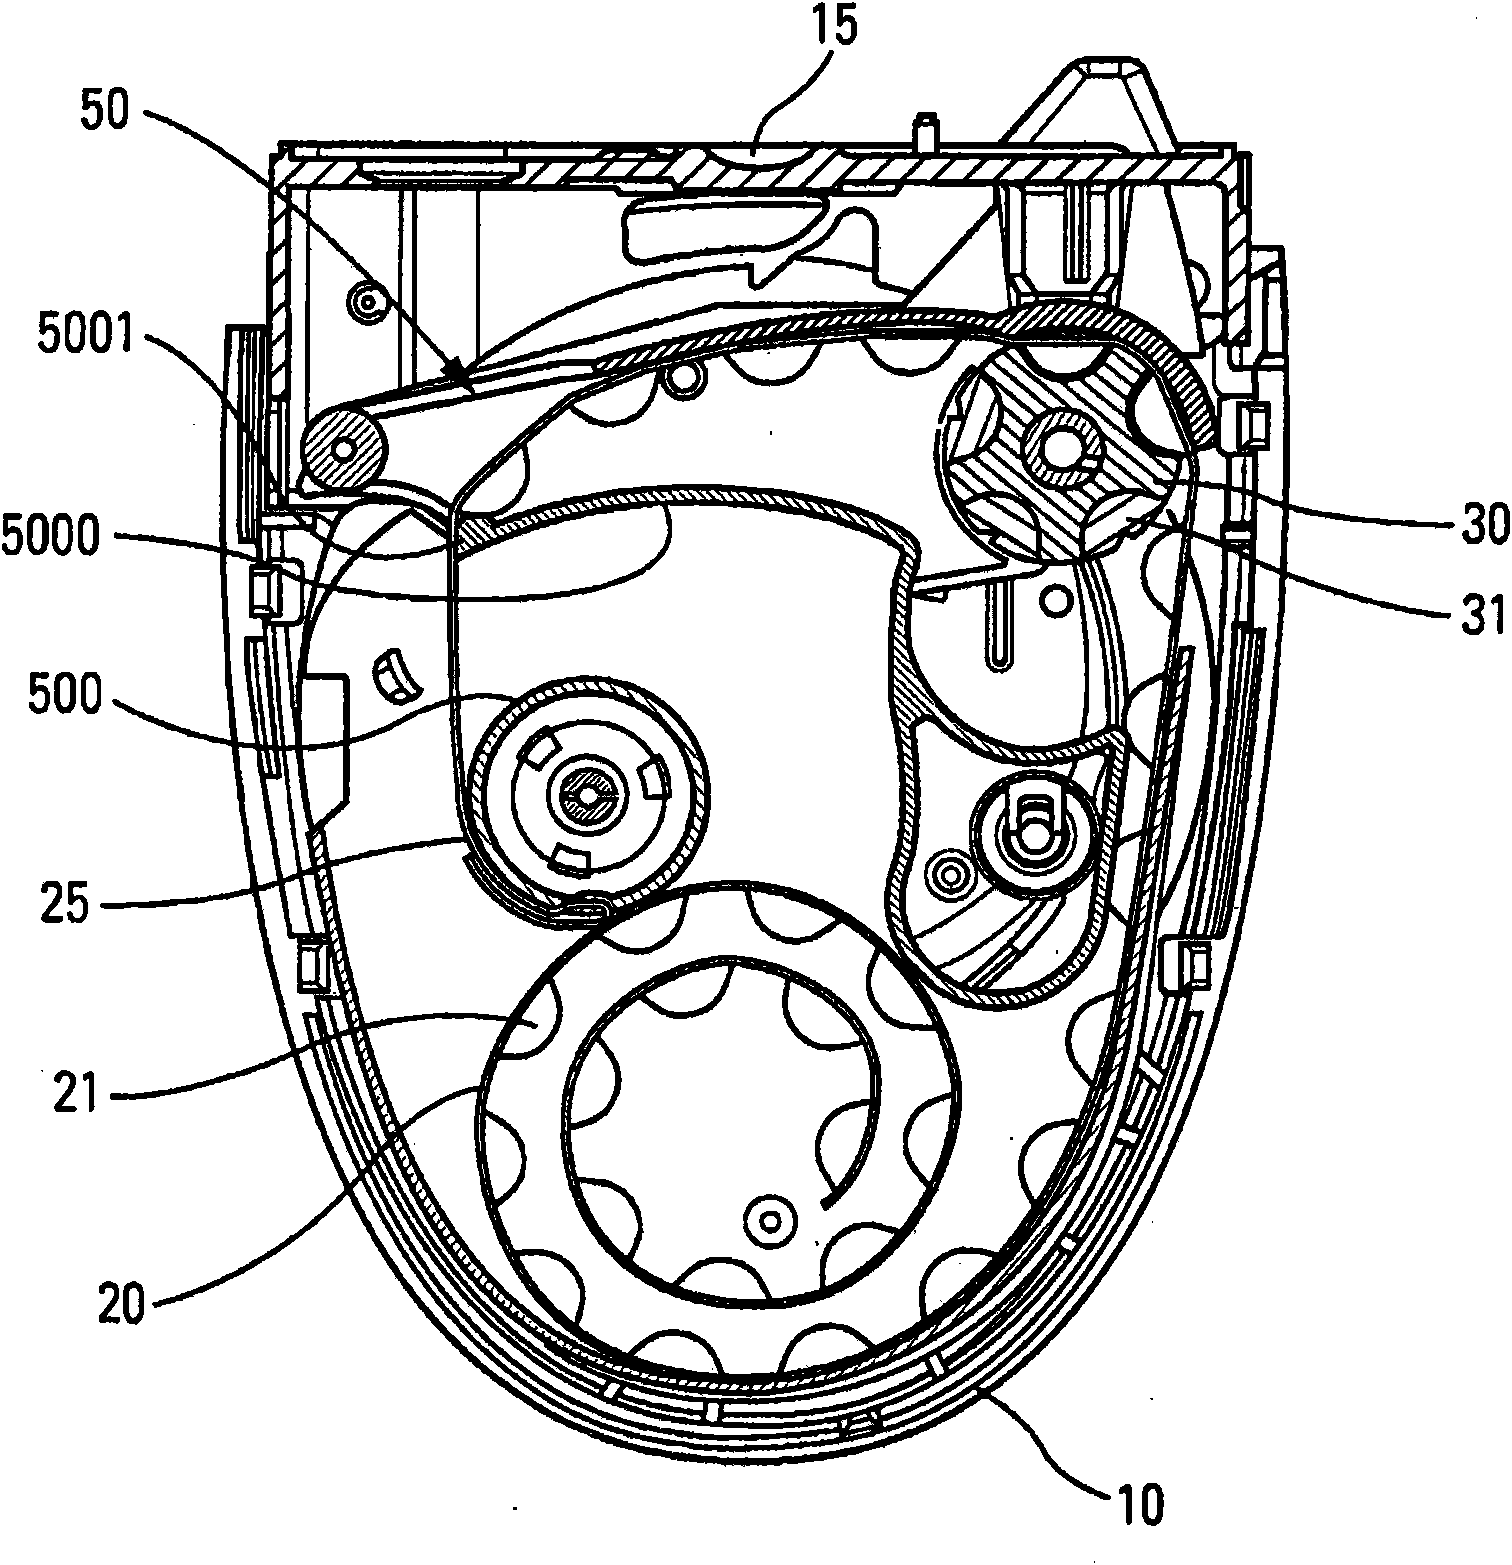 Device for distributing a fluid product